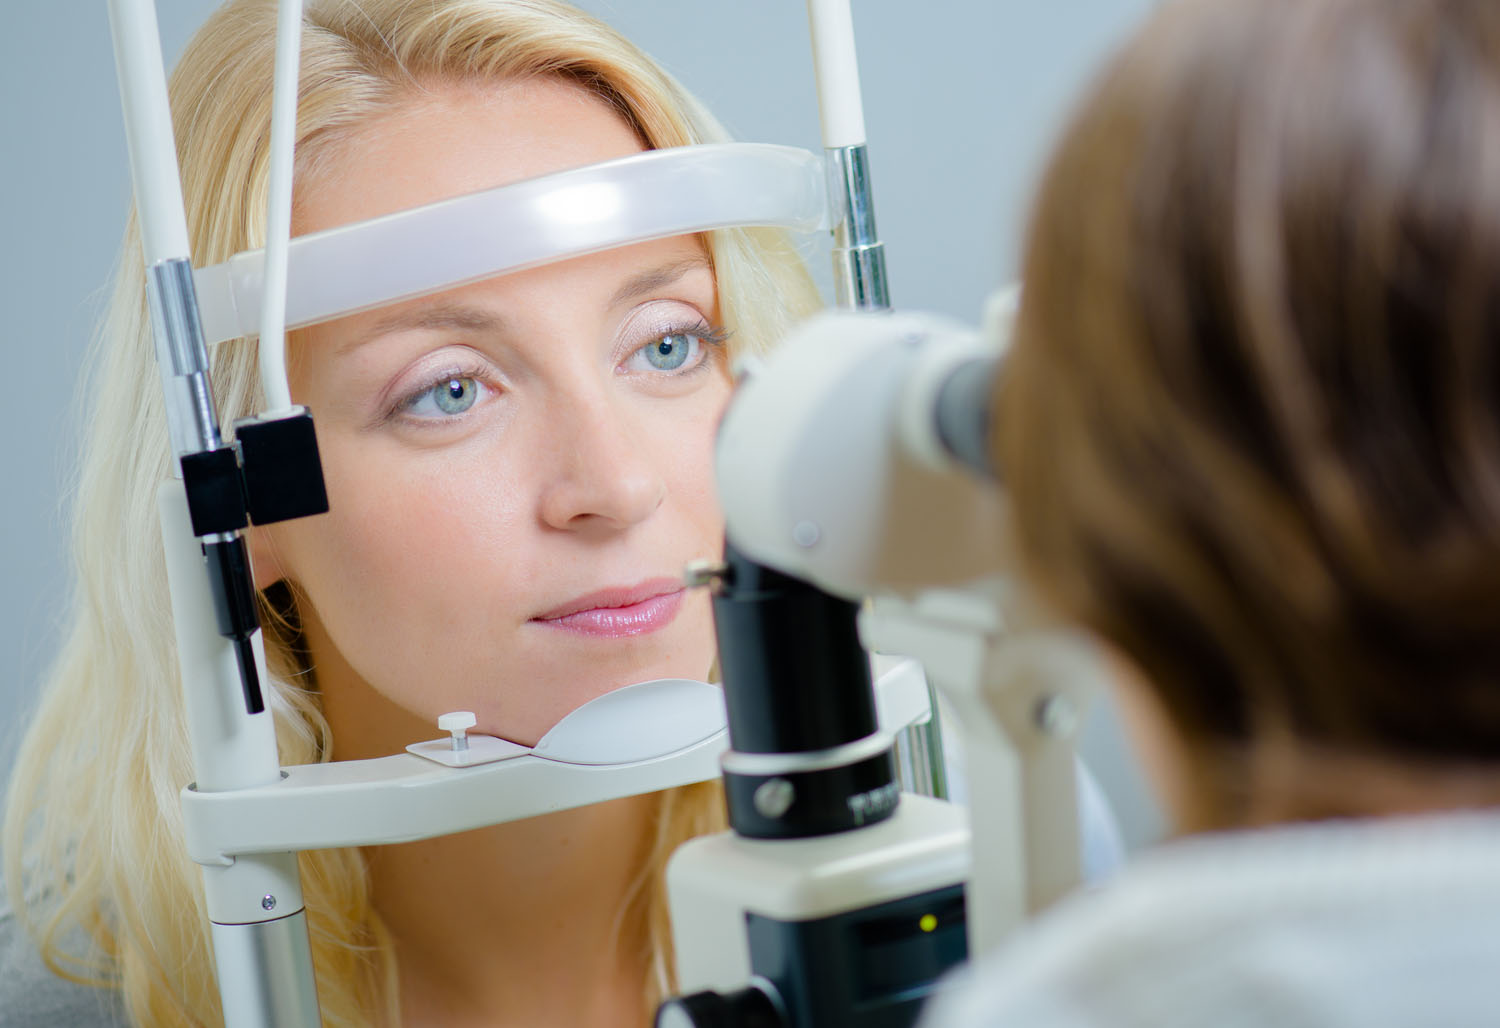 Woman getting an eye exam at Eyecare Specialties